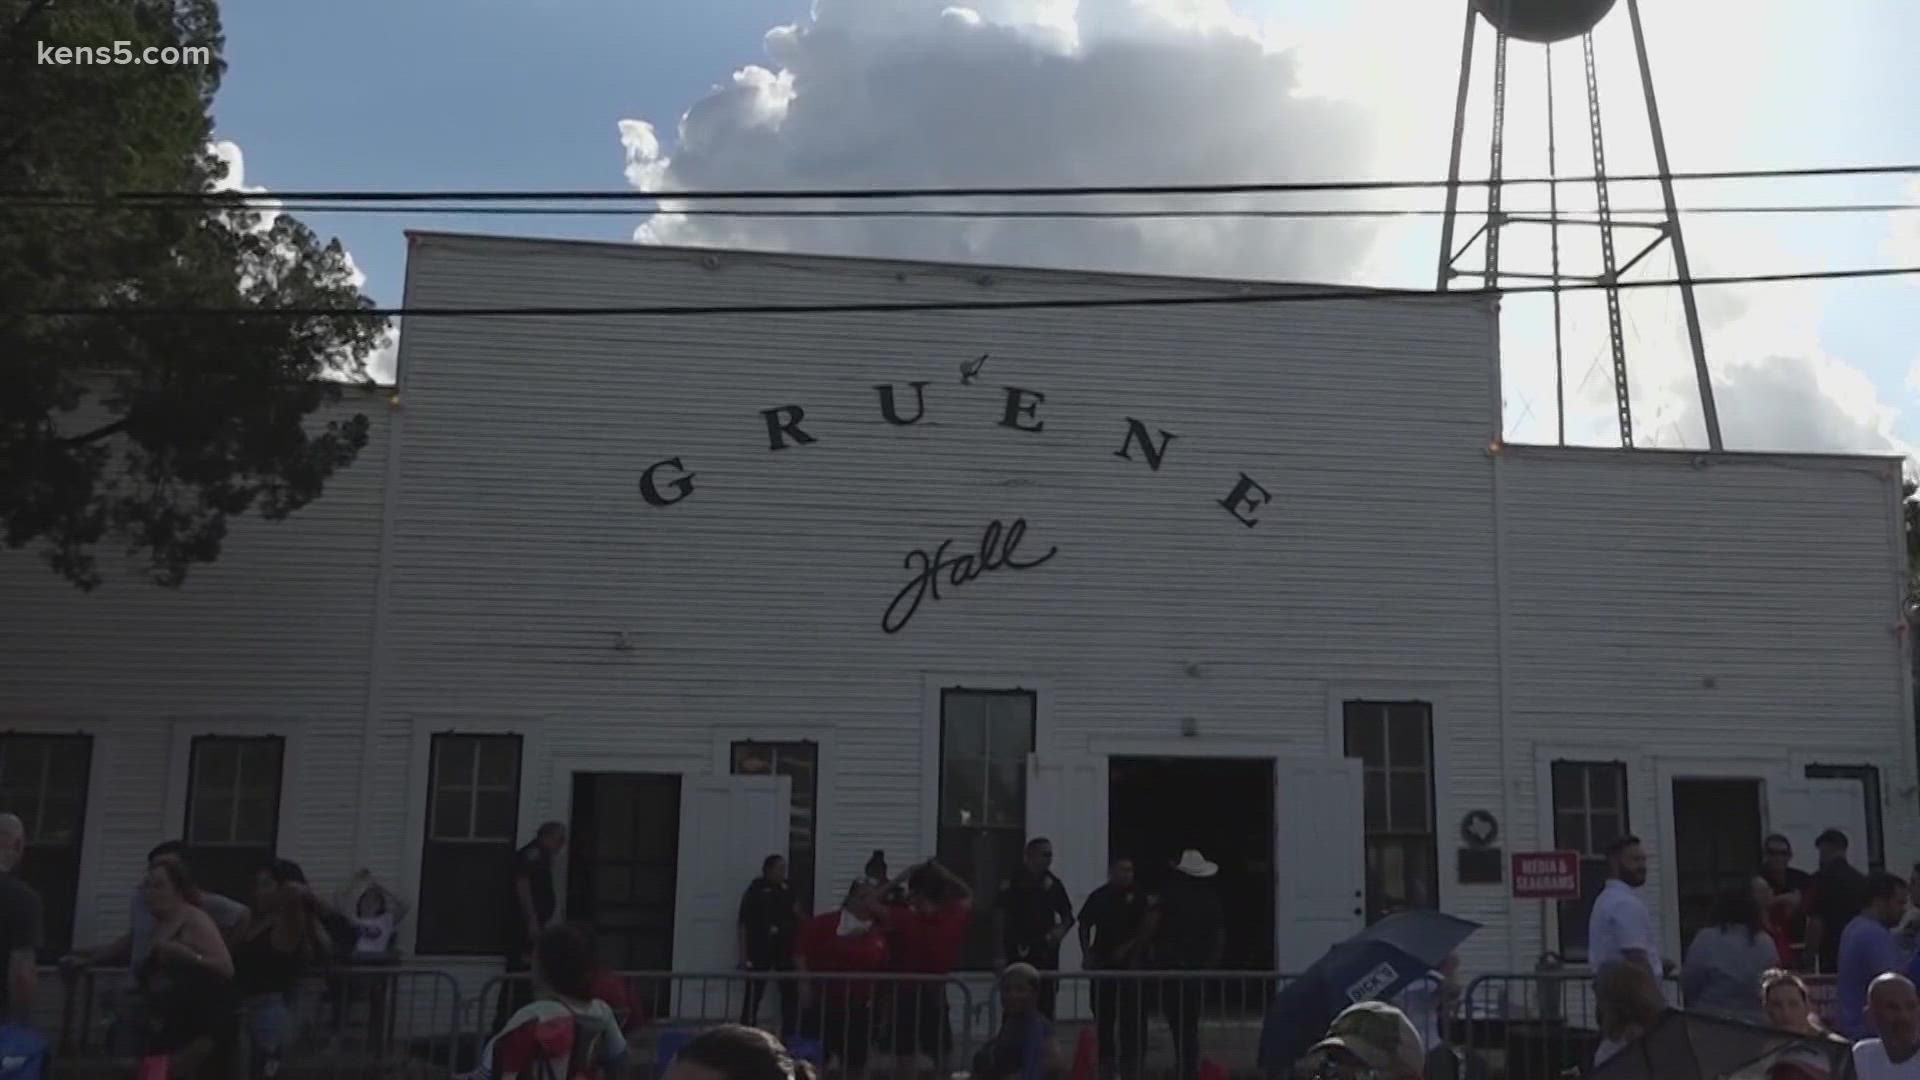 Gruene Hall struggled to survive the pandemic, but it did. The venue's all-star lineup includes: John Wolfe, Ray Wylie Hubbard, Lyle Lovett and James McMurtry.